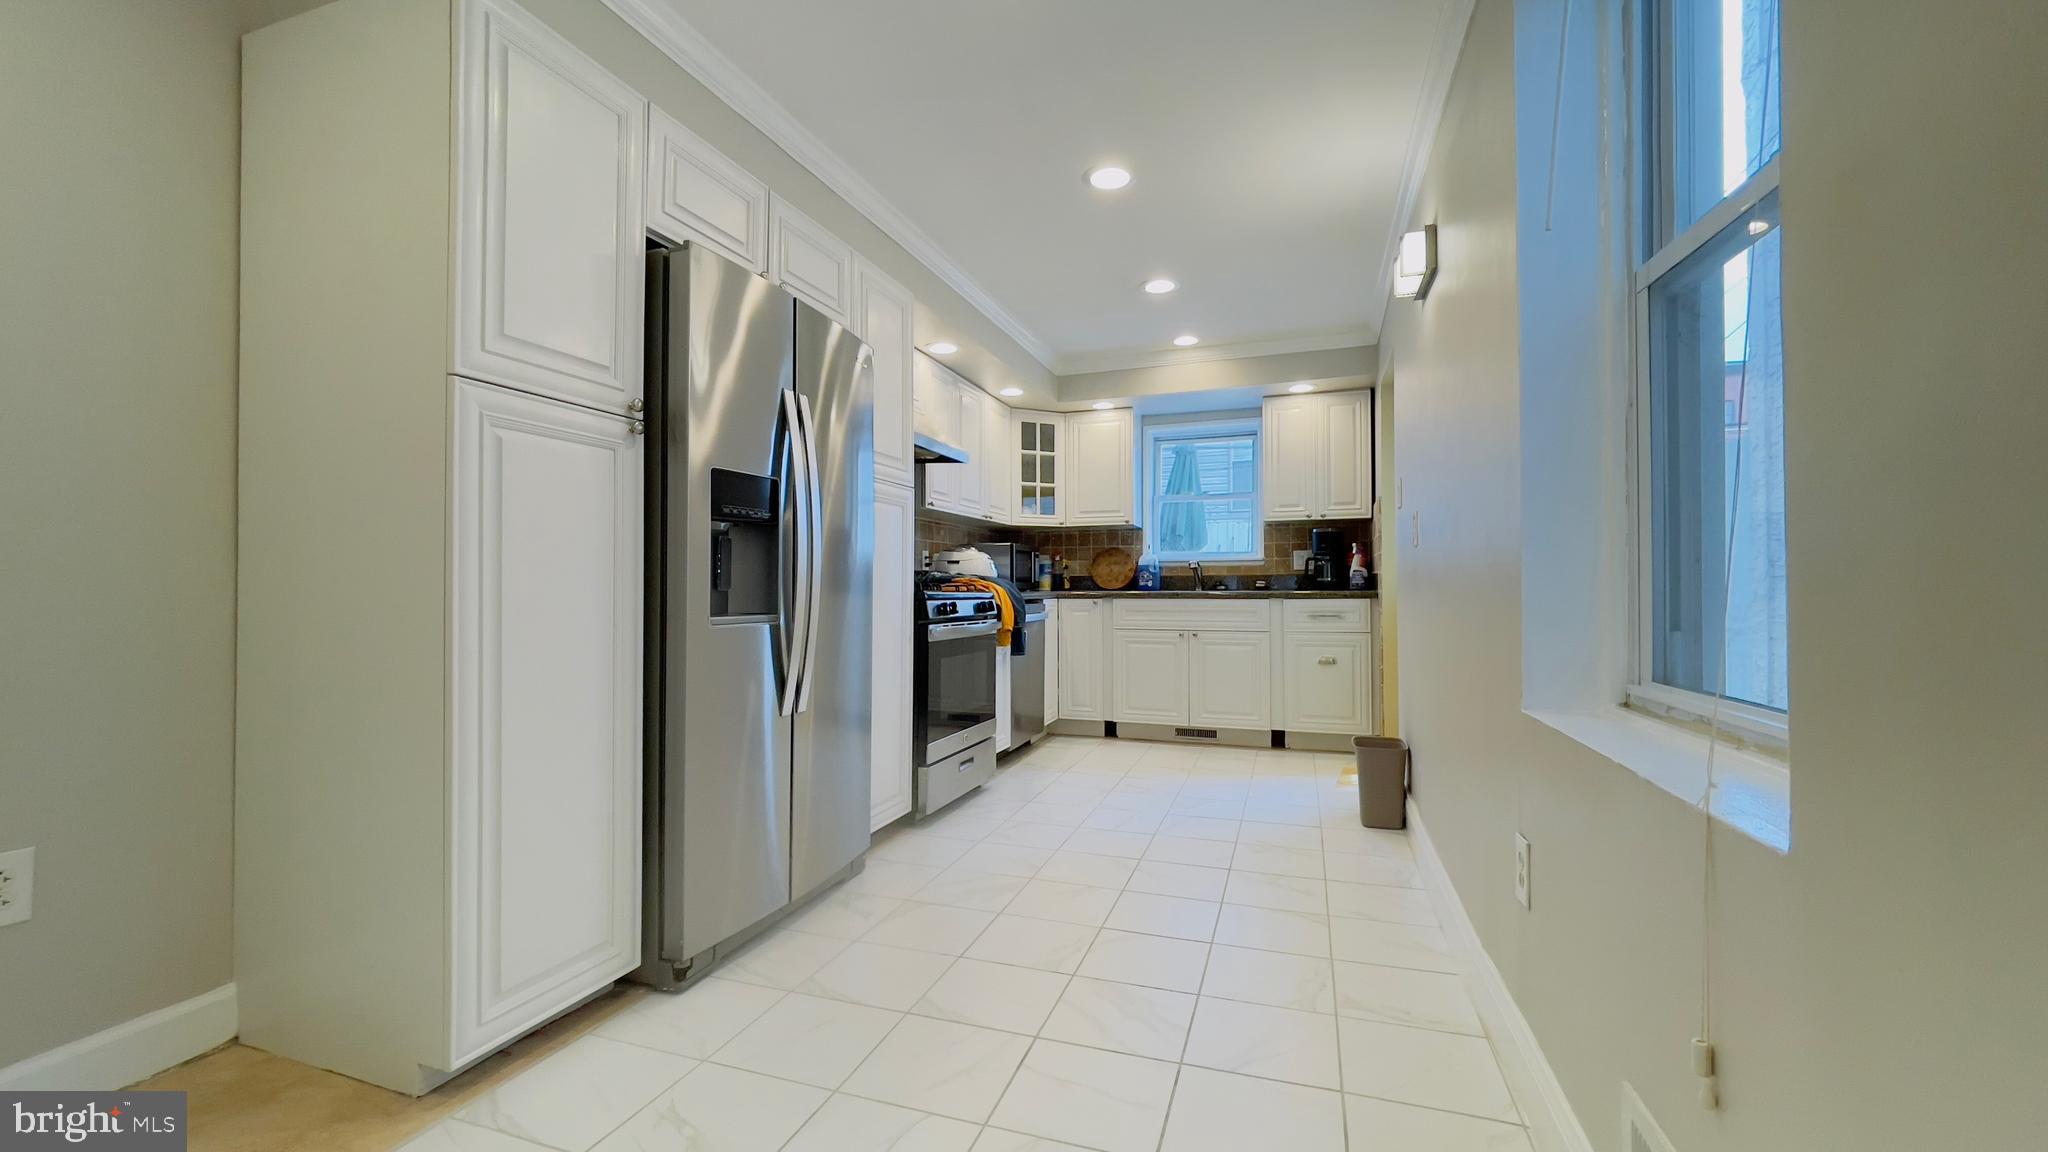 a view of a kitchen with refrigerator and white cabinets